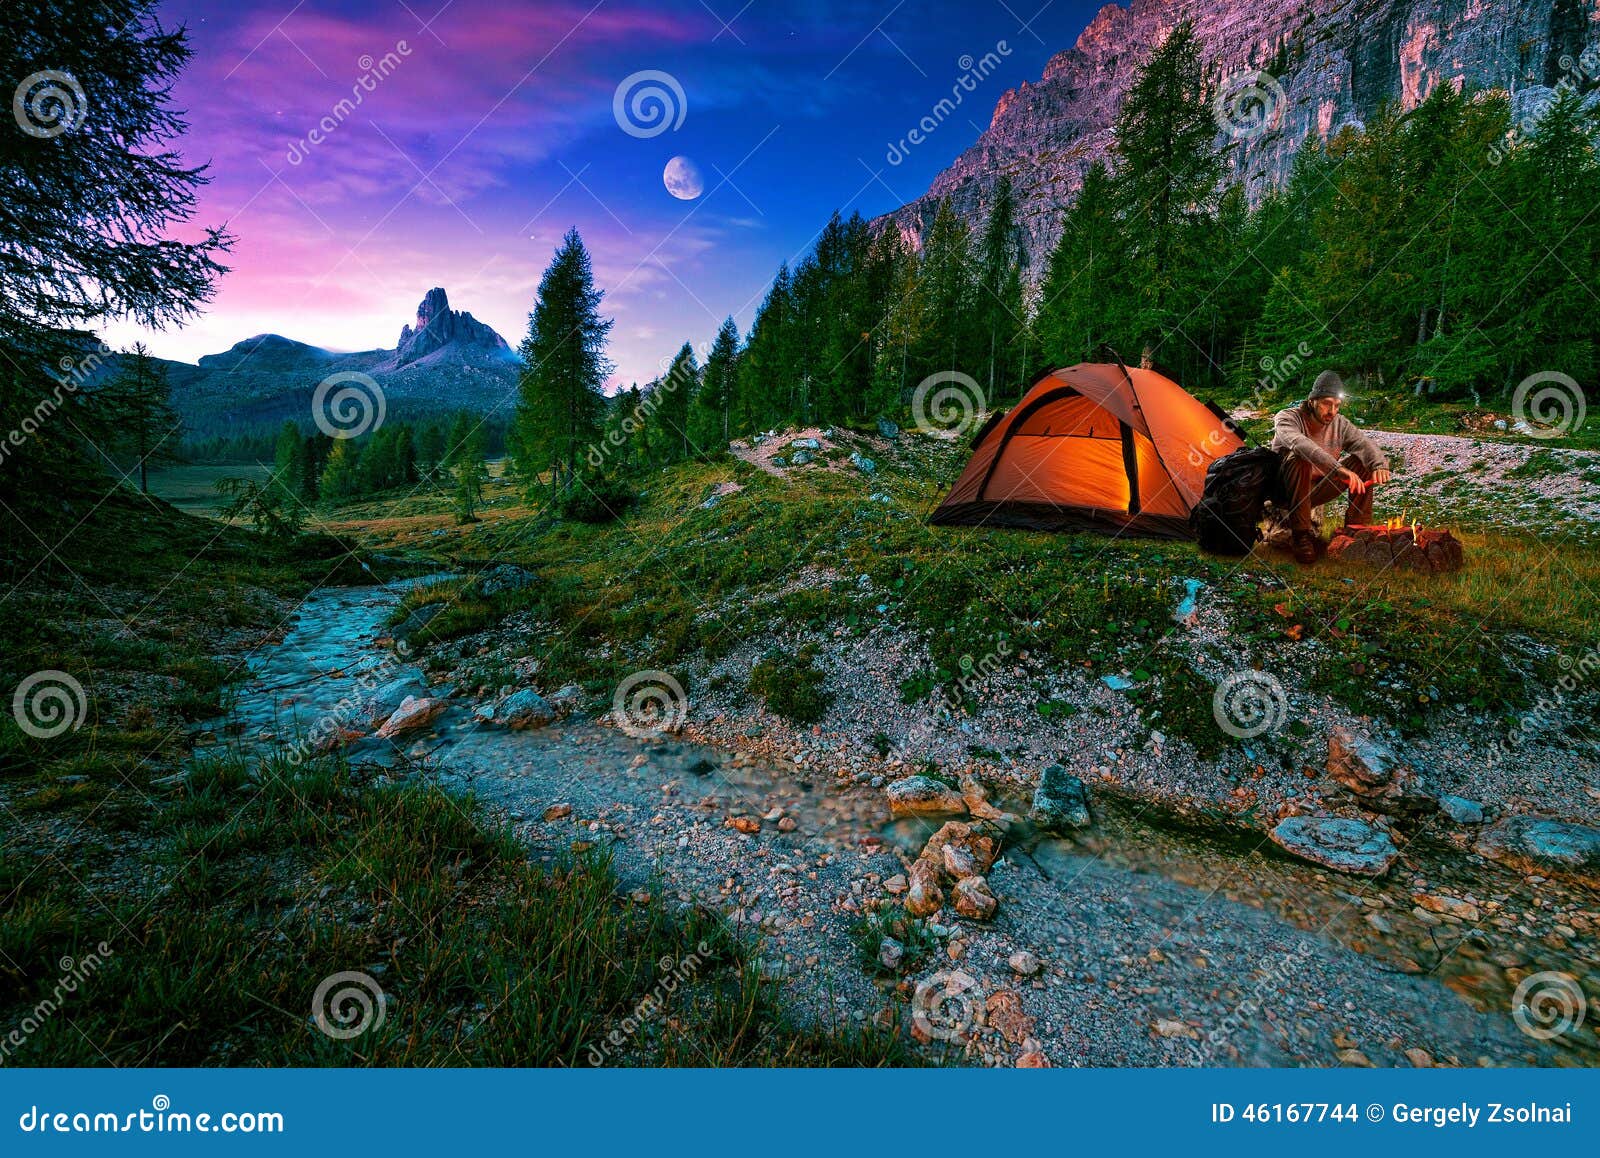 mystical night landscape, in the foreground hike, campfire and tent